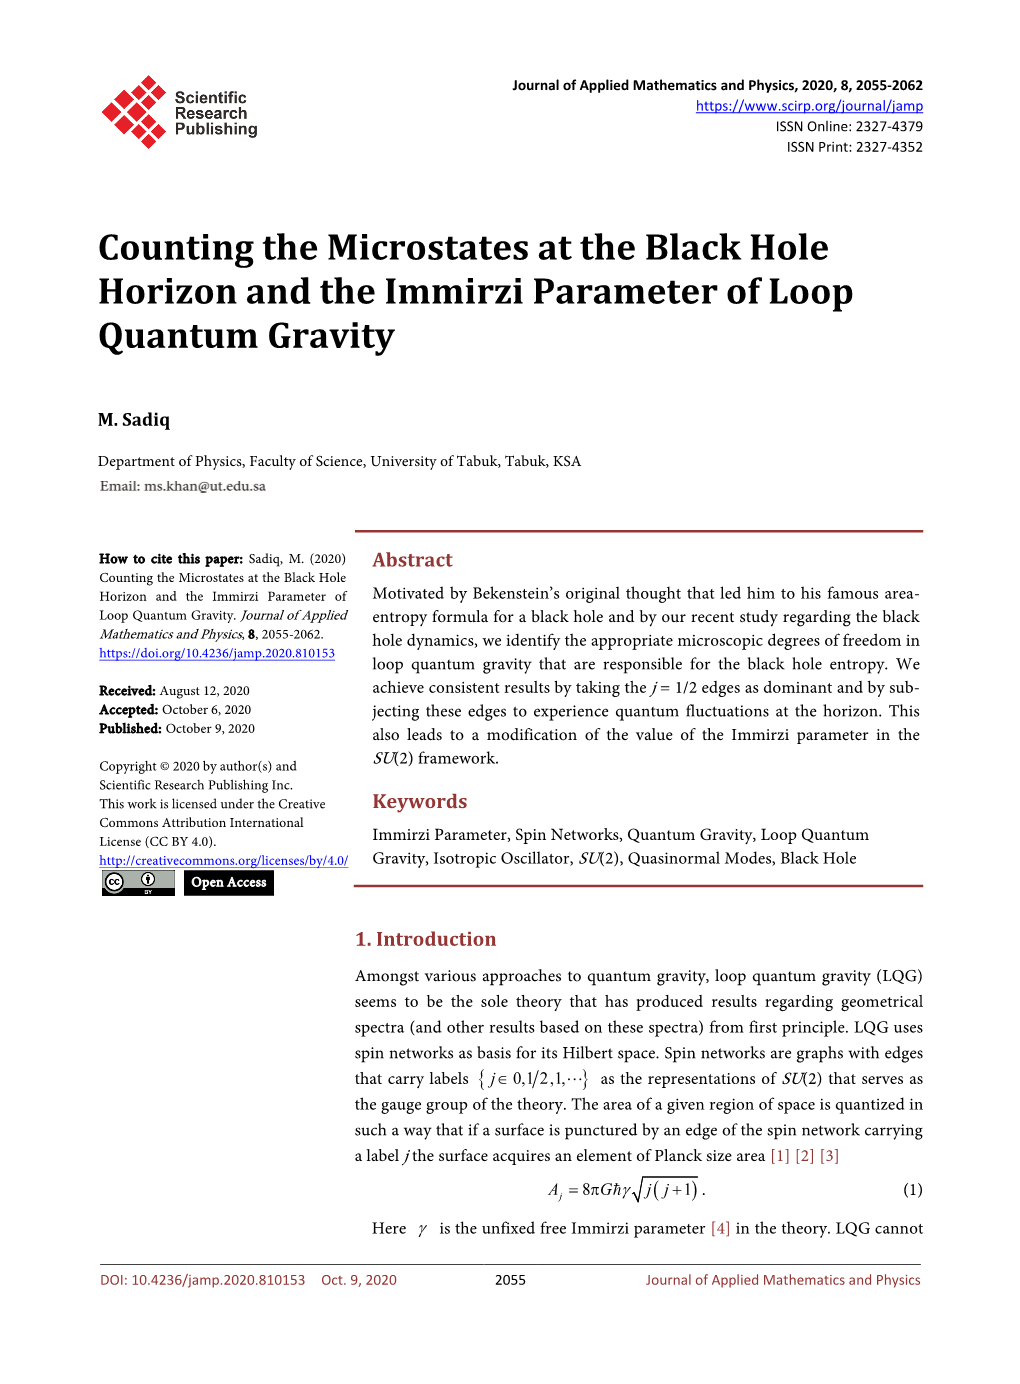 Counting the Microstates at the Black Hole Horizon and the Immirzi Parameter of Loop Quantum Gravity